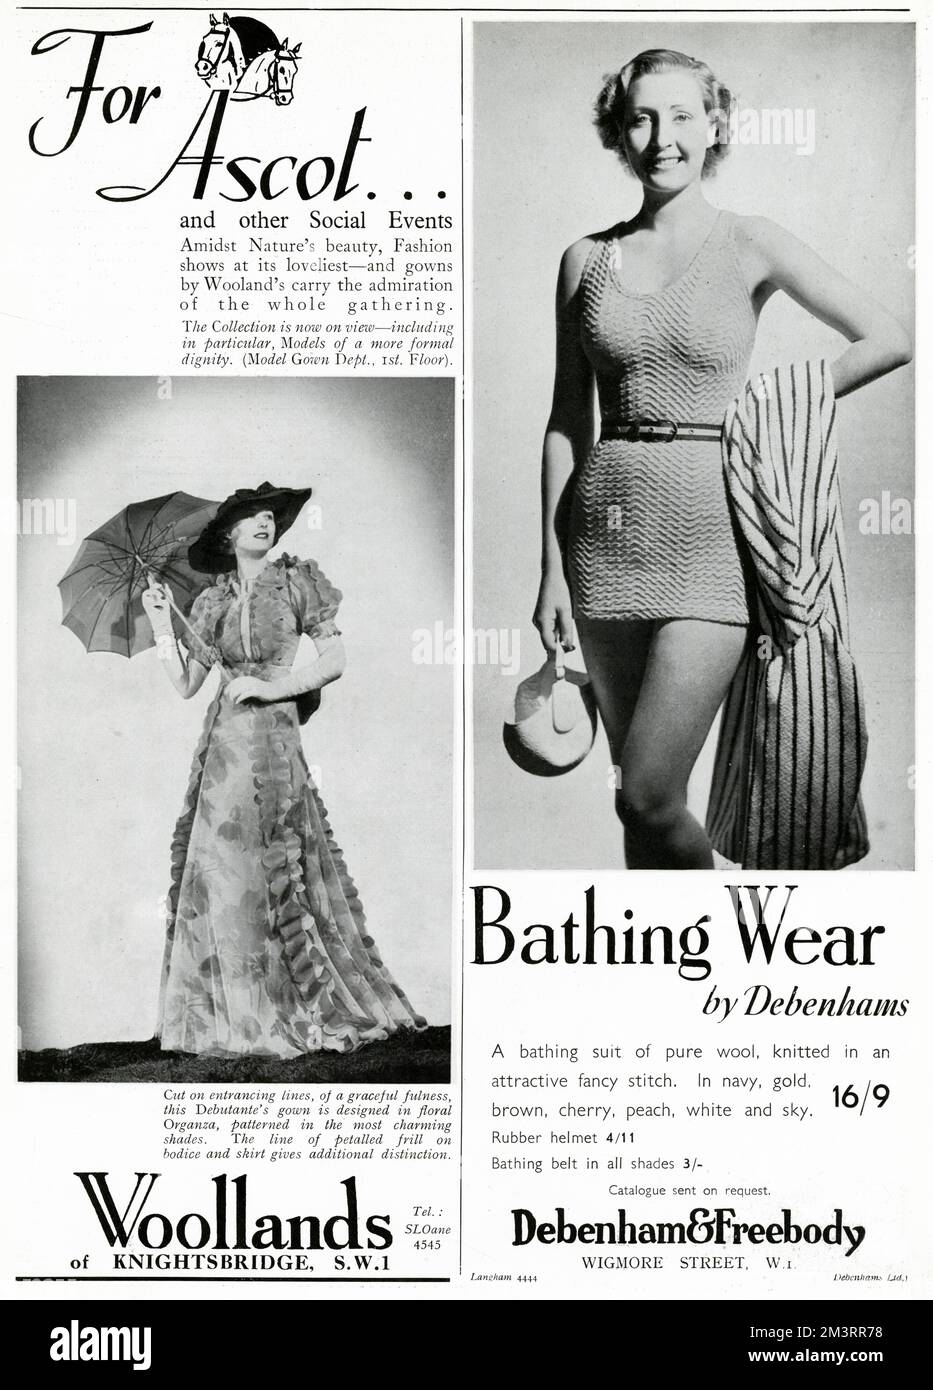 Two adverts from 'Woolands' of model wearing a graceful full length Ascot dress, designed in floral organza, patterned in charming shades, petalled frill on bodice and skirt. On the right, advert from Debenham & Freebody , one-piece belted bathing suit of pure wool, knitted in an attractive stitch.     Date: June 1937 Stock Photo